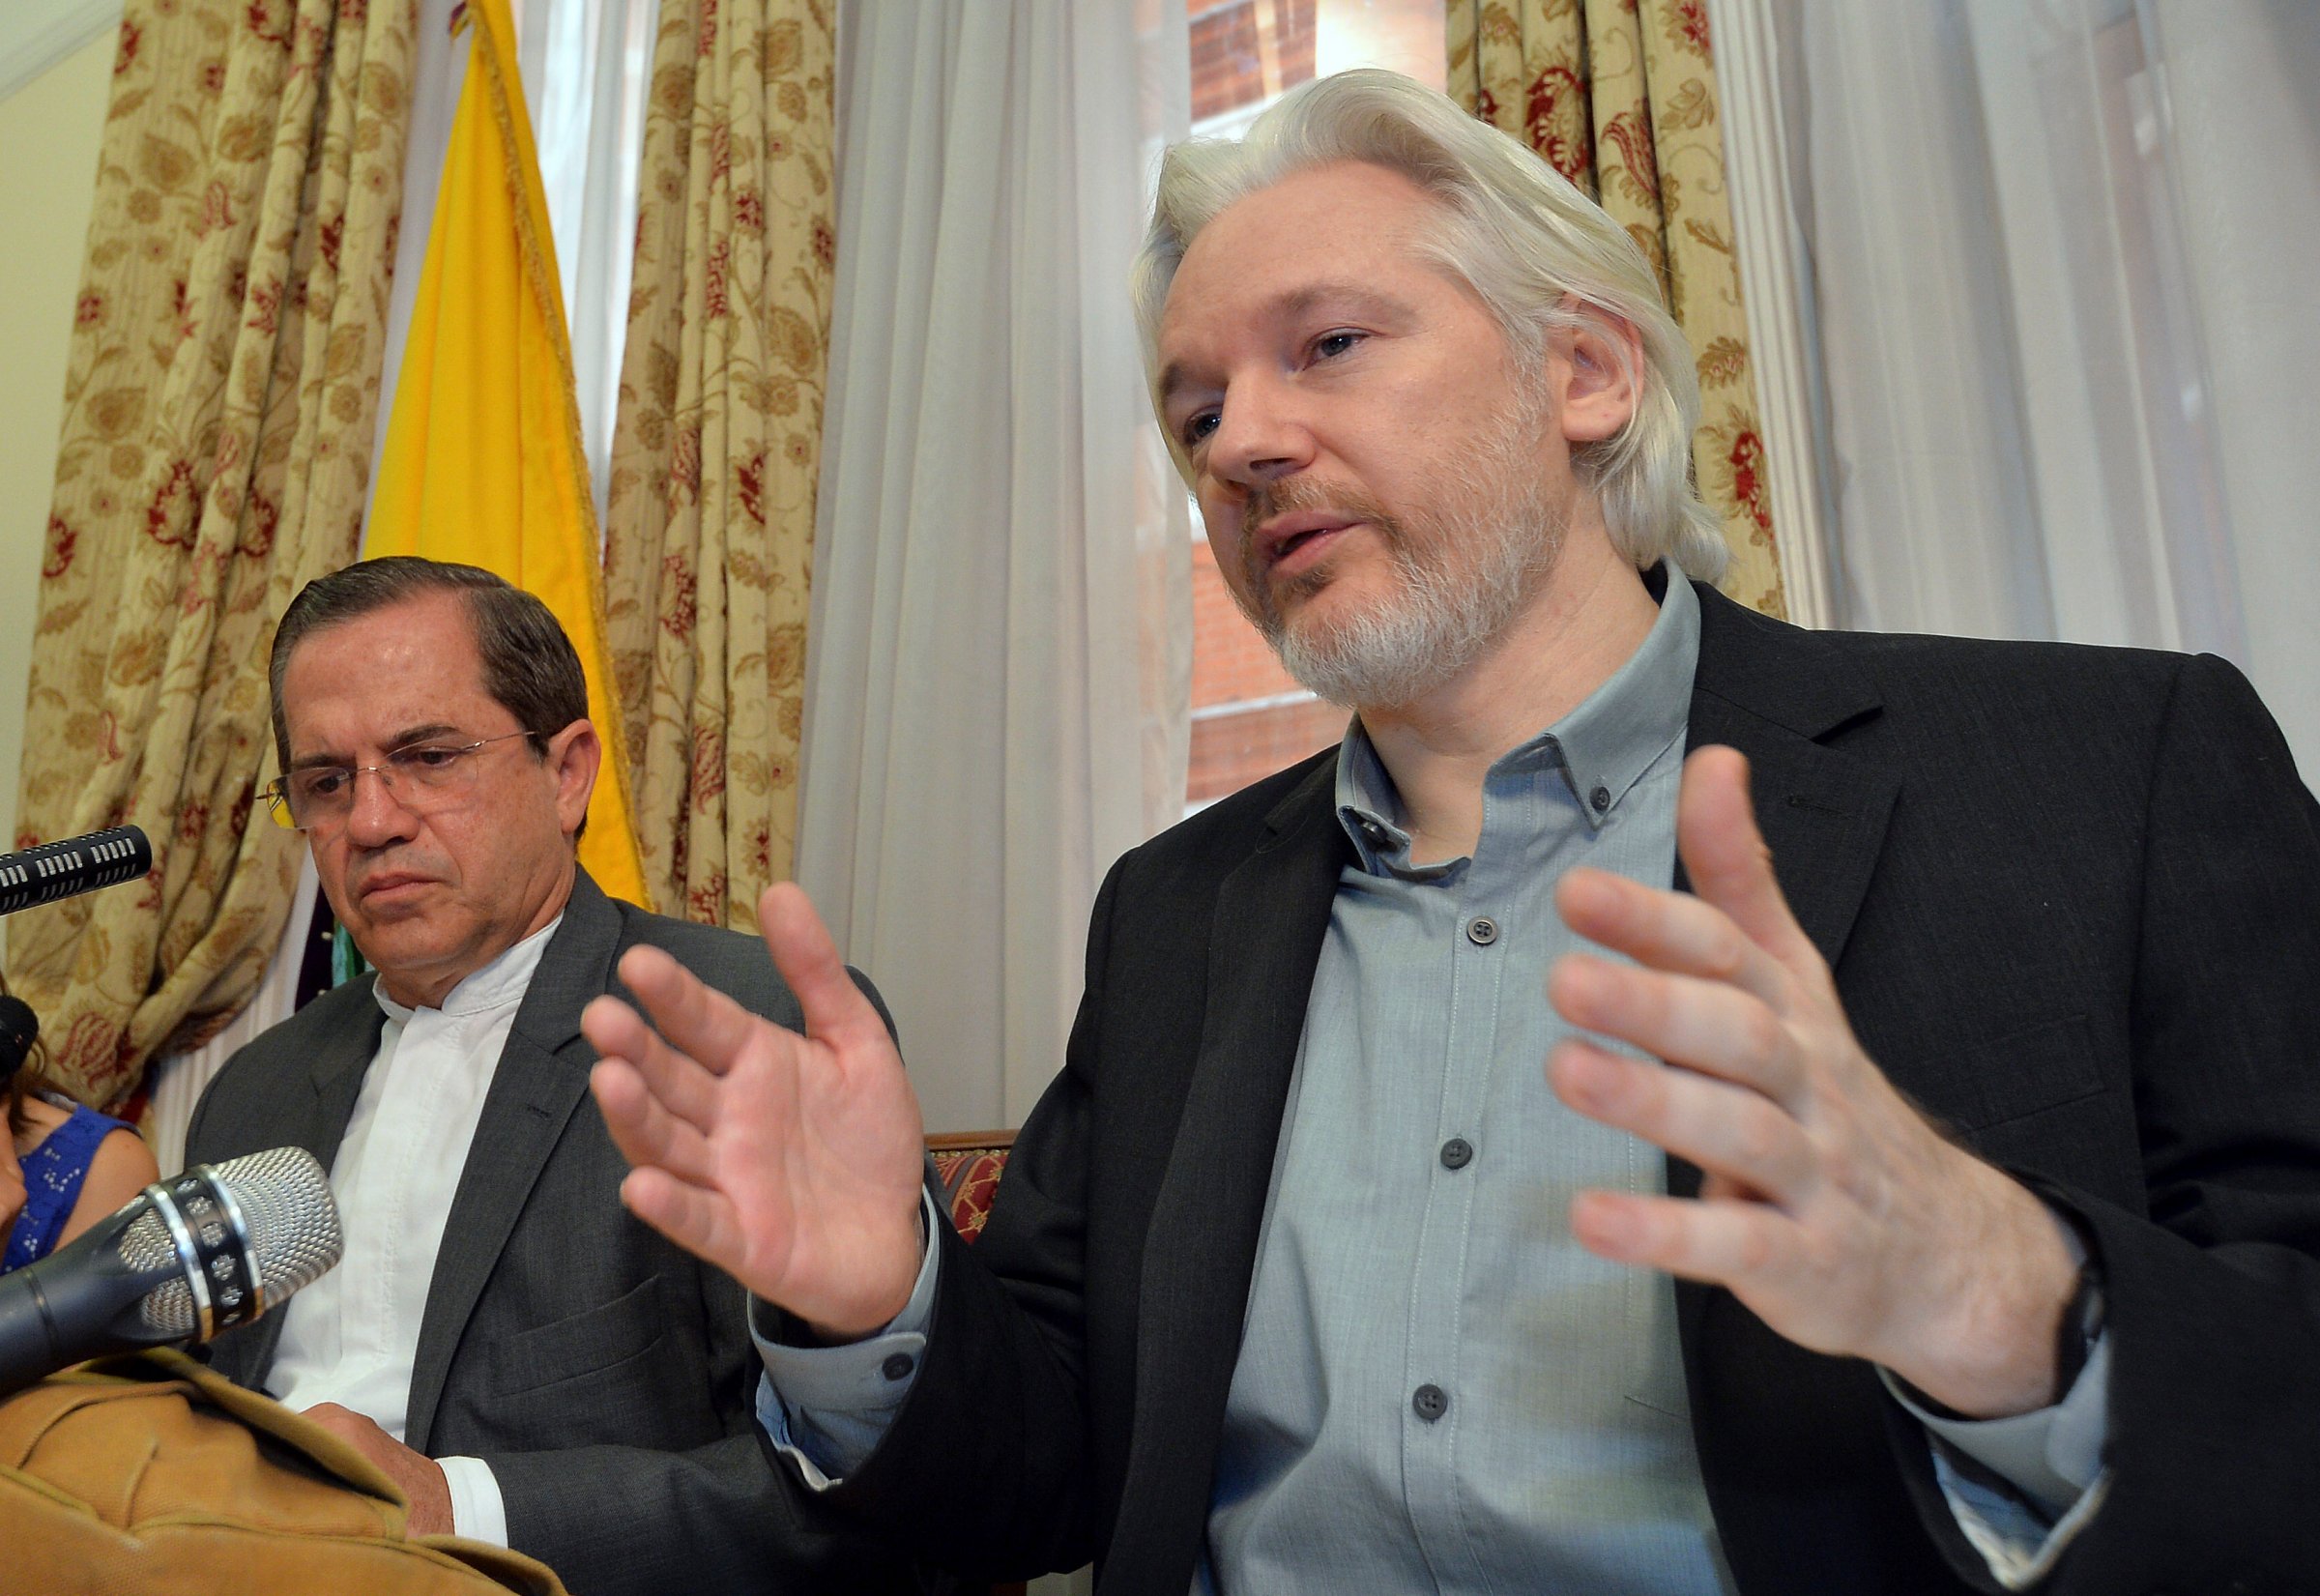 WikiLeaks founder Julian Assange speaks during a news conference at the Ecuadorian embassy in central London